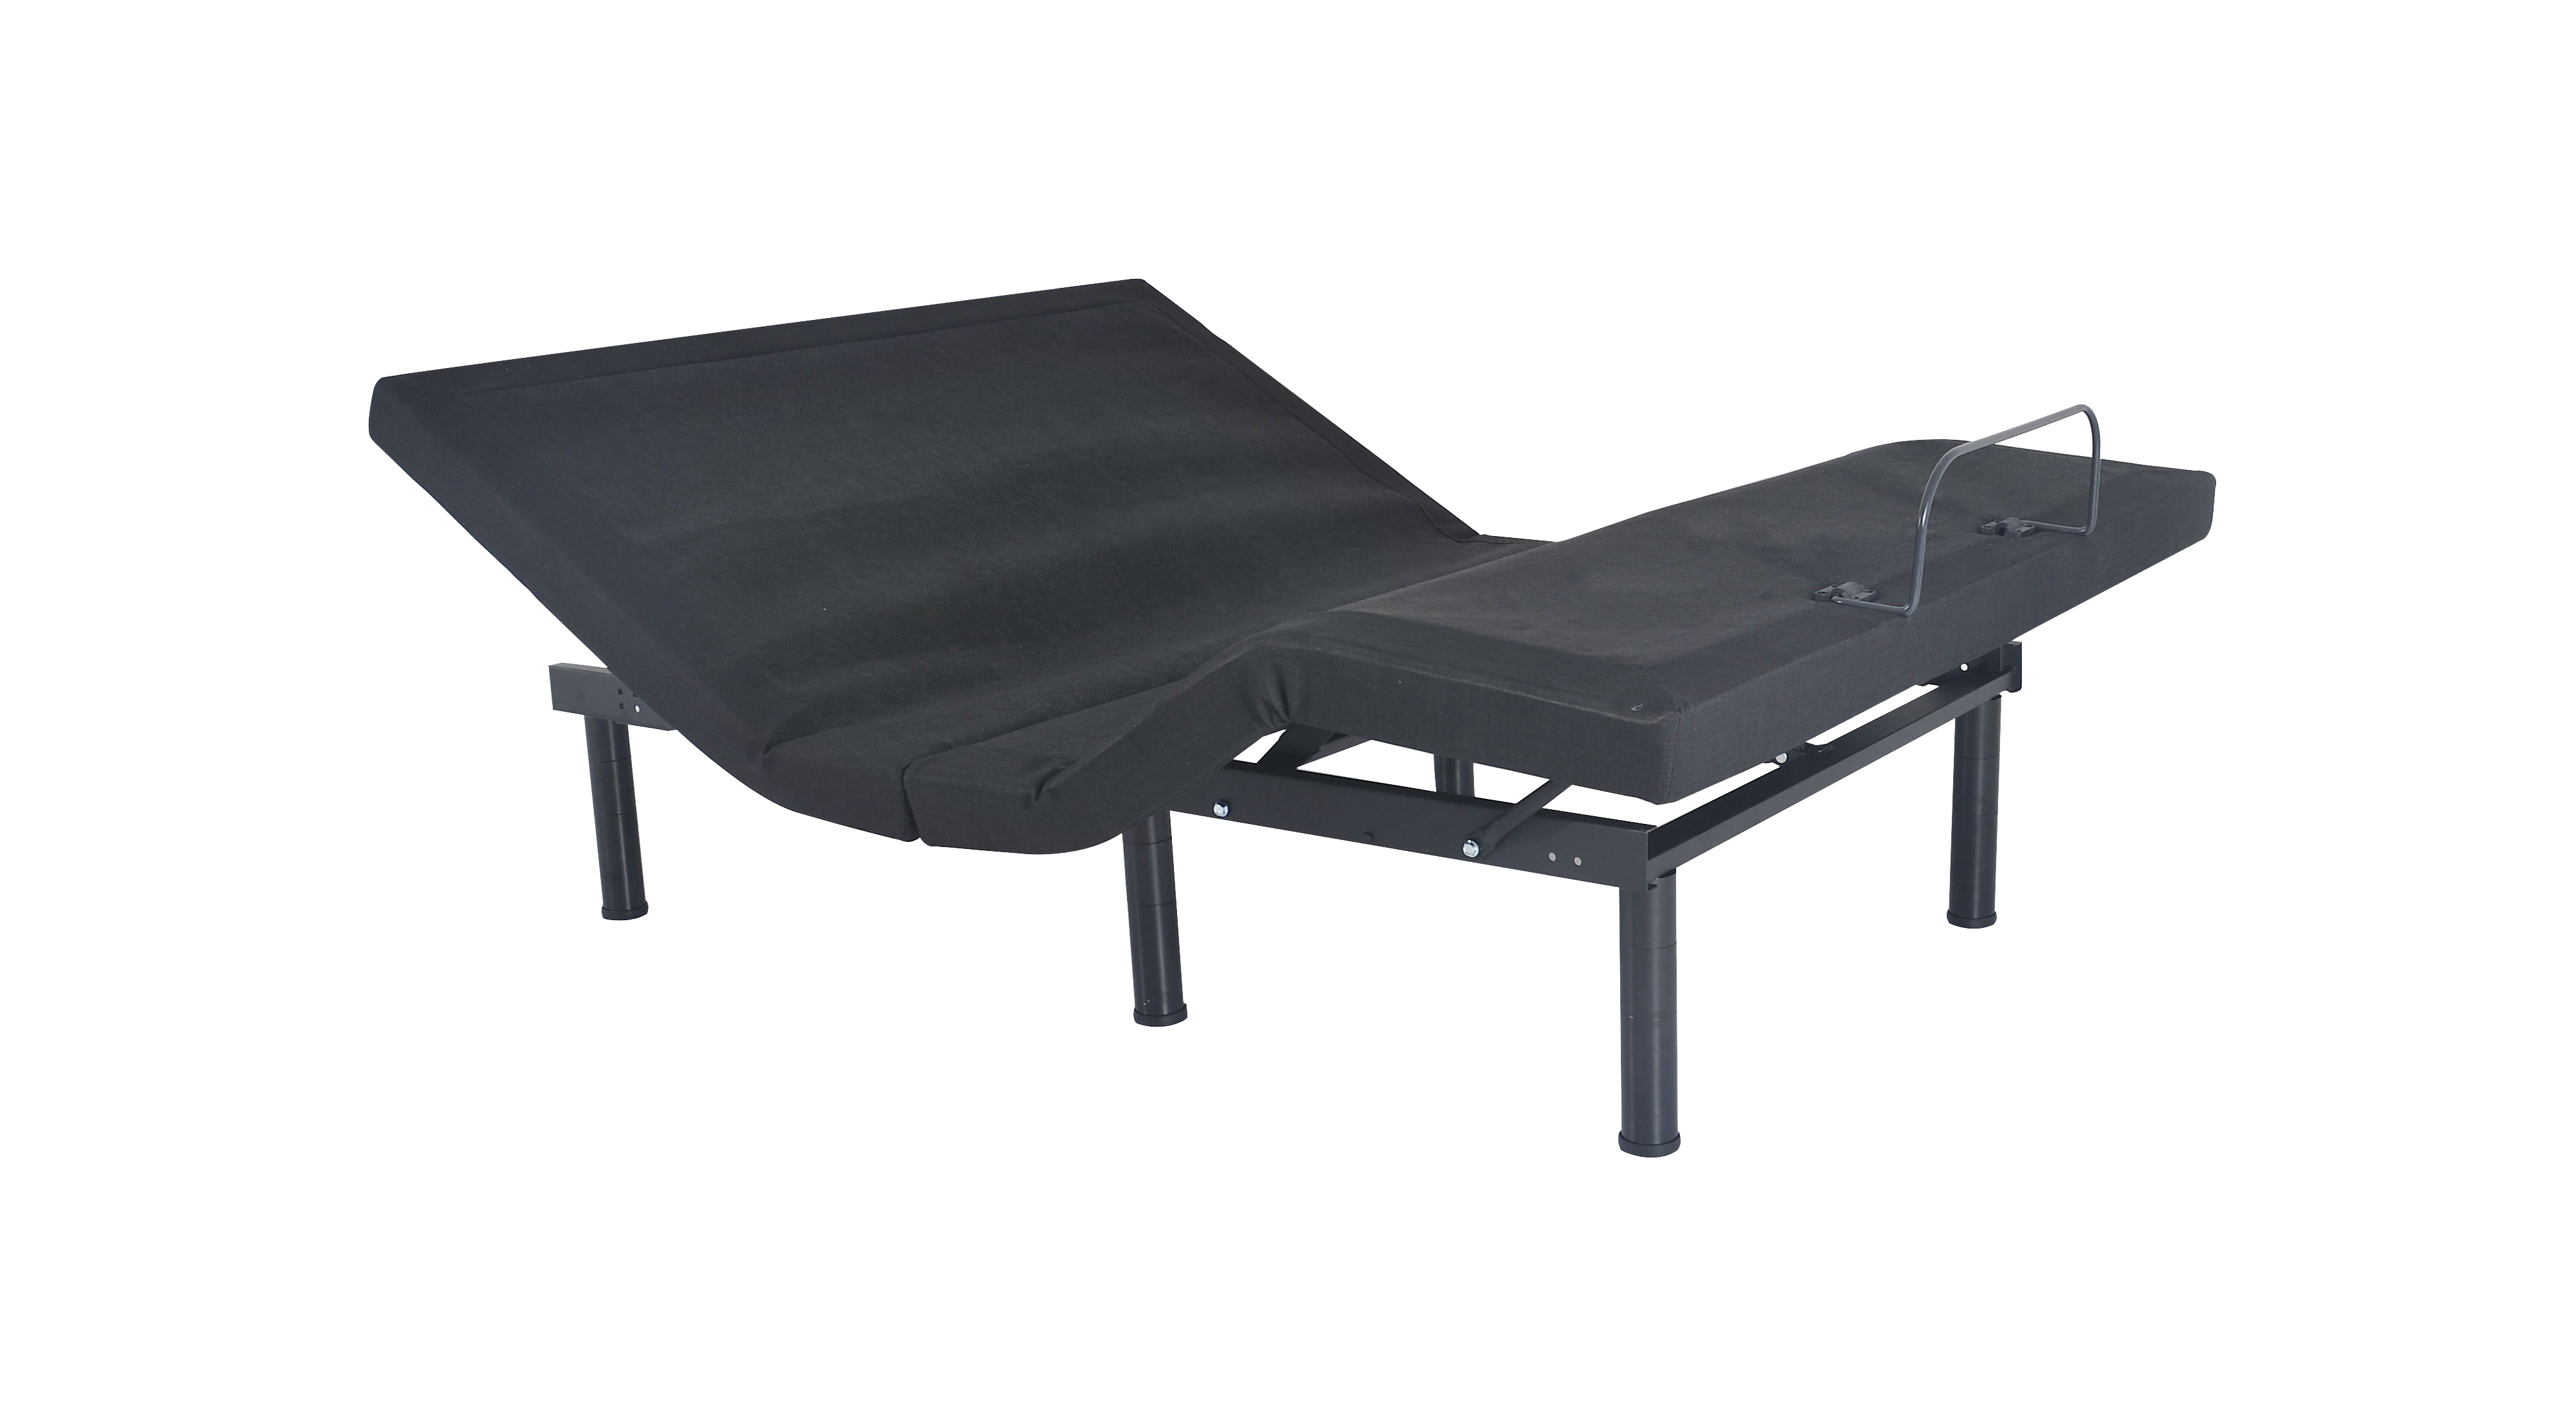 A Black NL200U Base is shown in adjusted position with head and foot of bed elevated on white background.